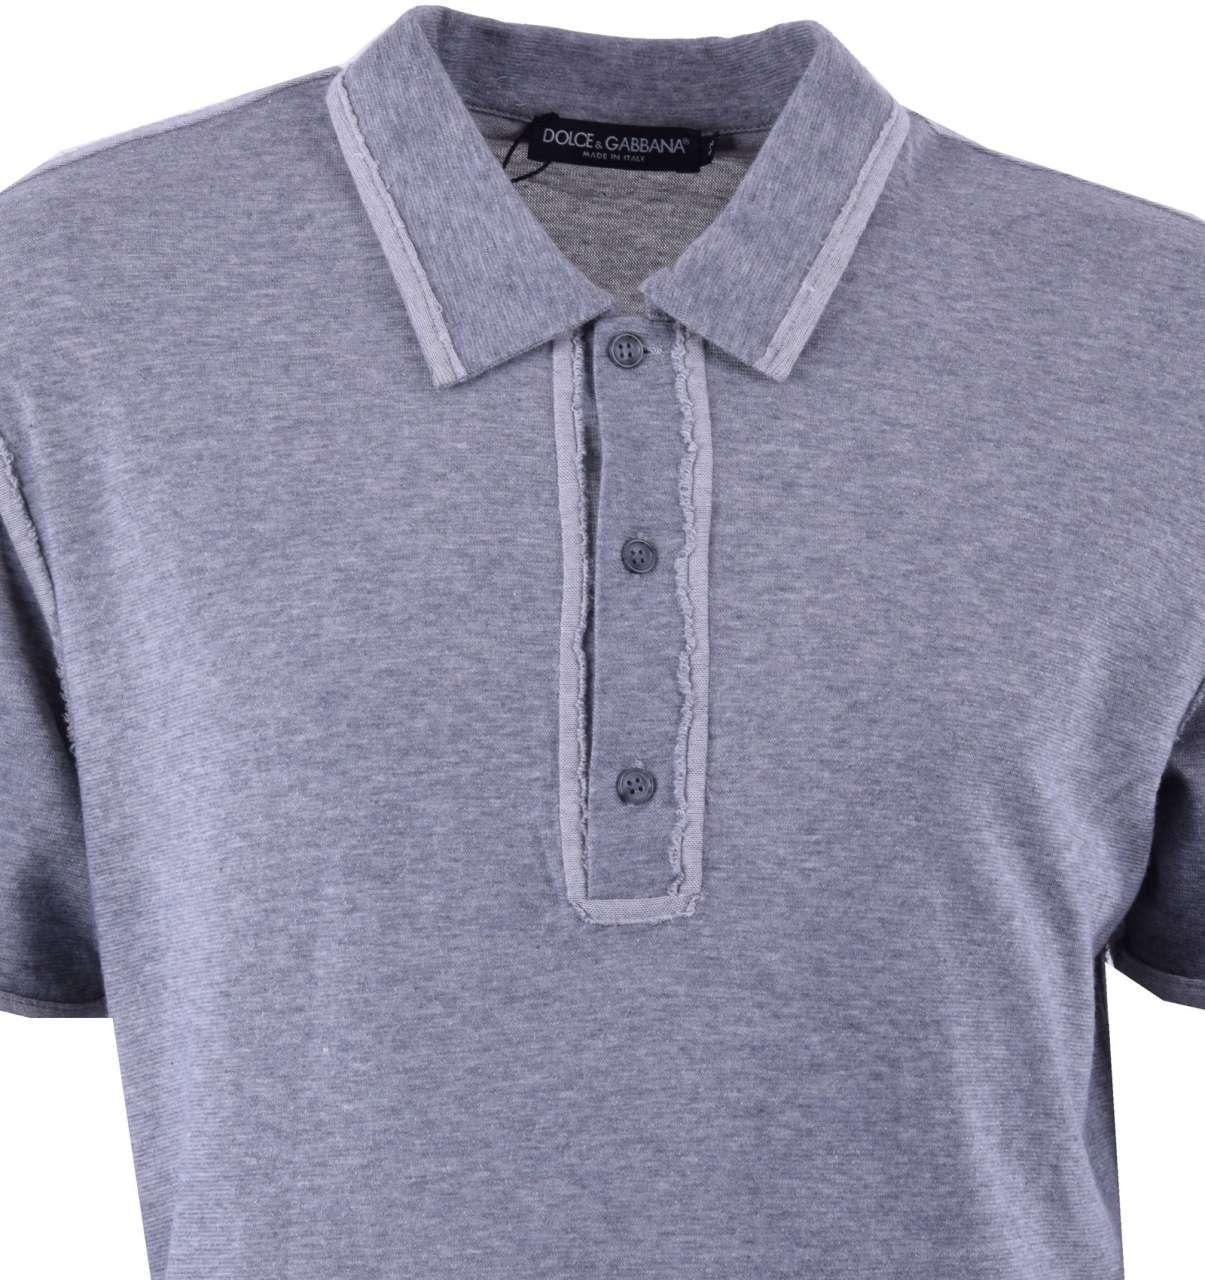 Dolce & Gabbana - Oversize Cotton Polo Shirt Gray 52 In Excellent Condition For Sale In Erkrath, DE